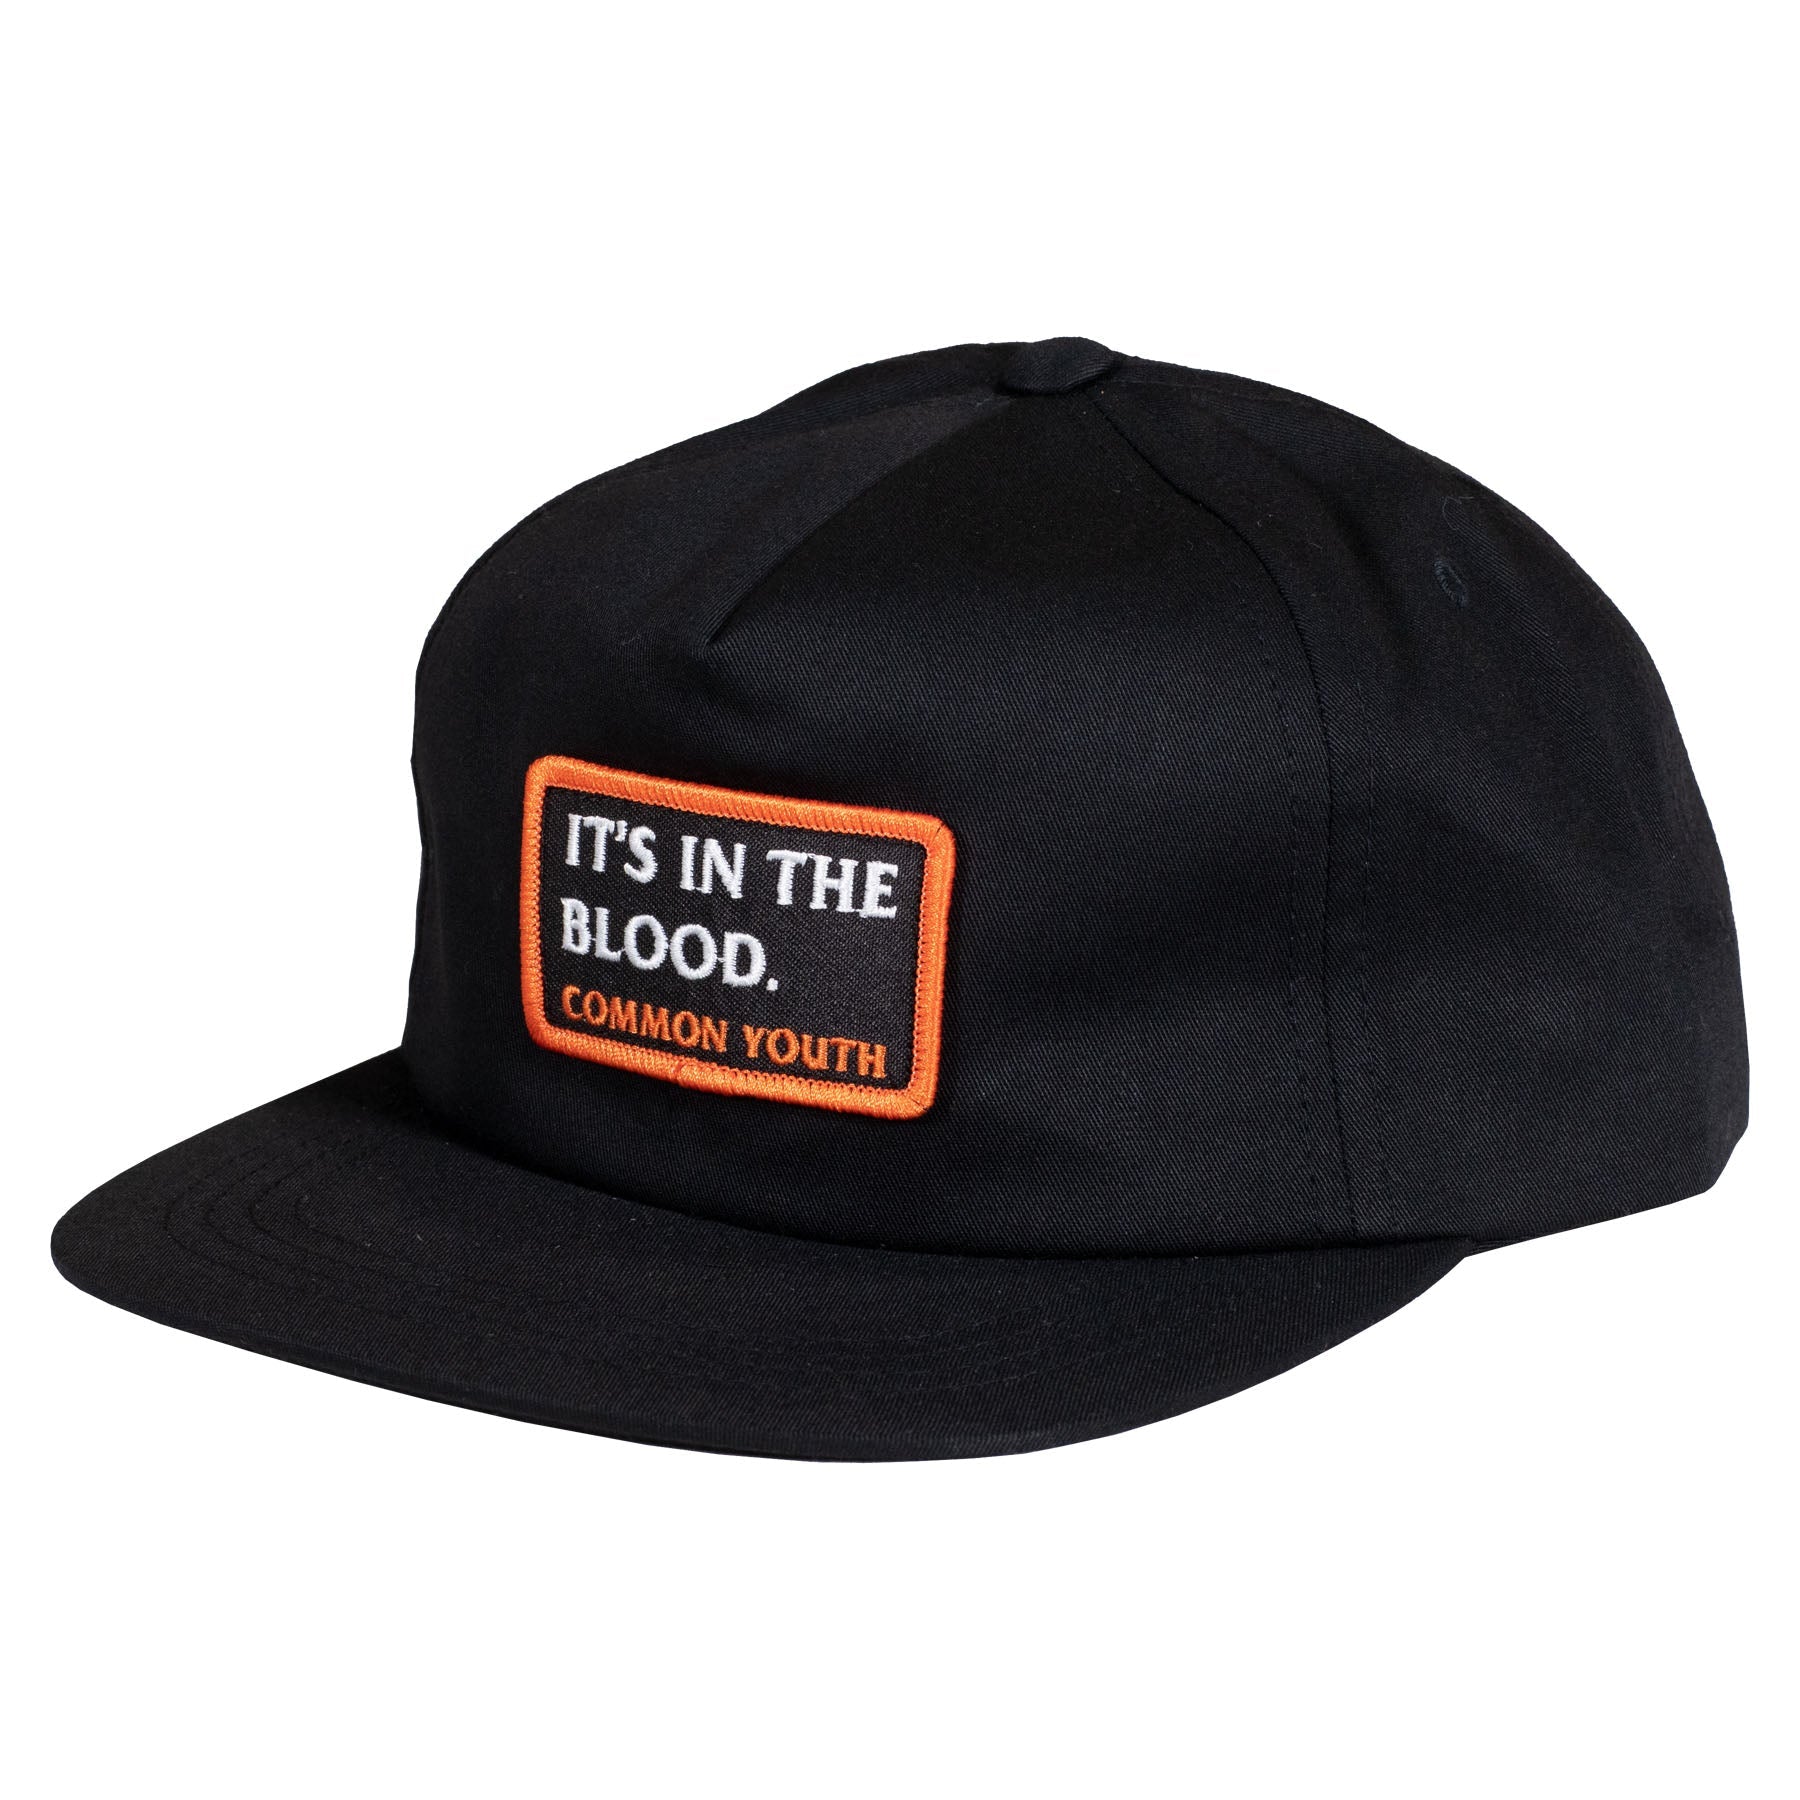 IN THE BLOOD CAP - commonyouthbrand